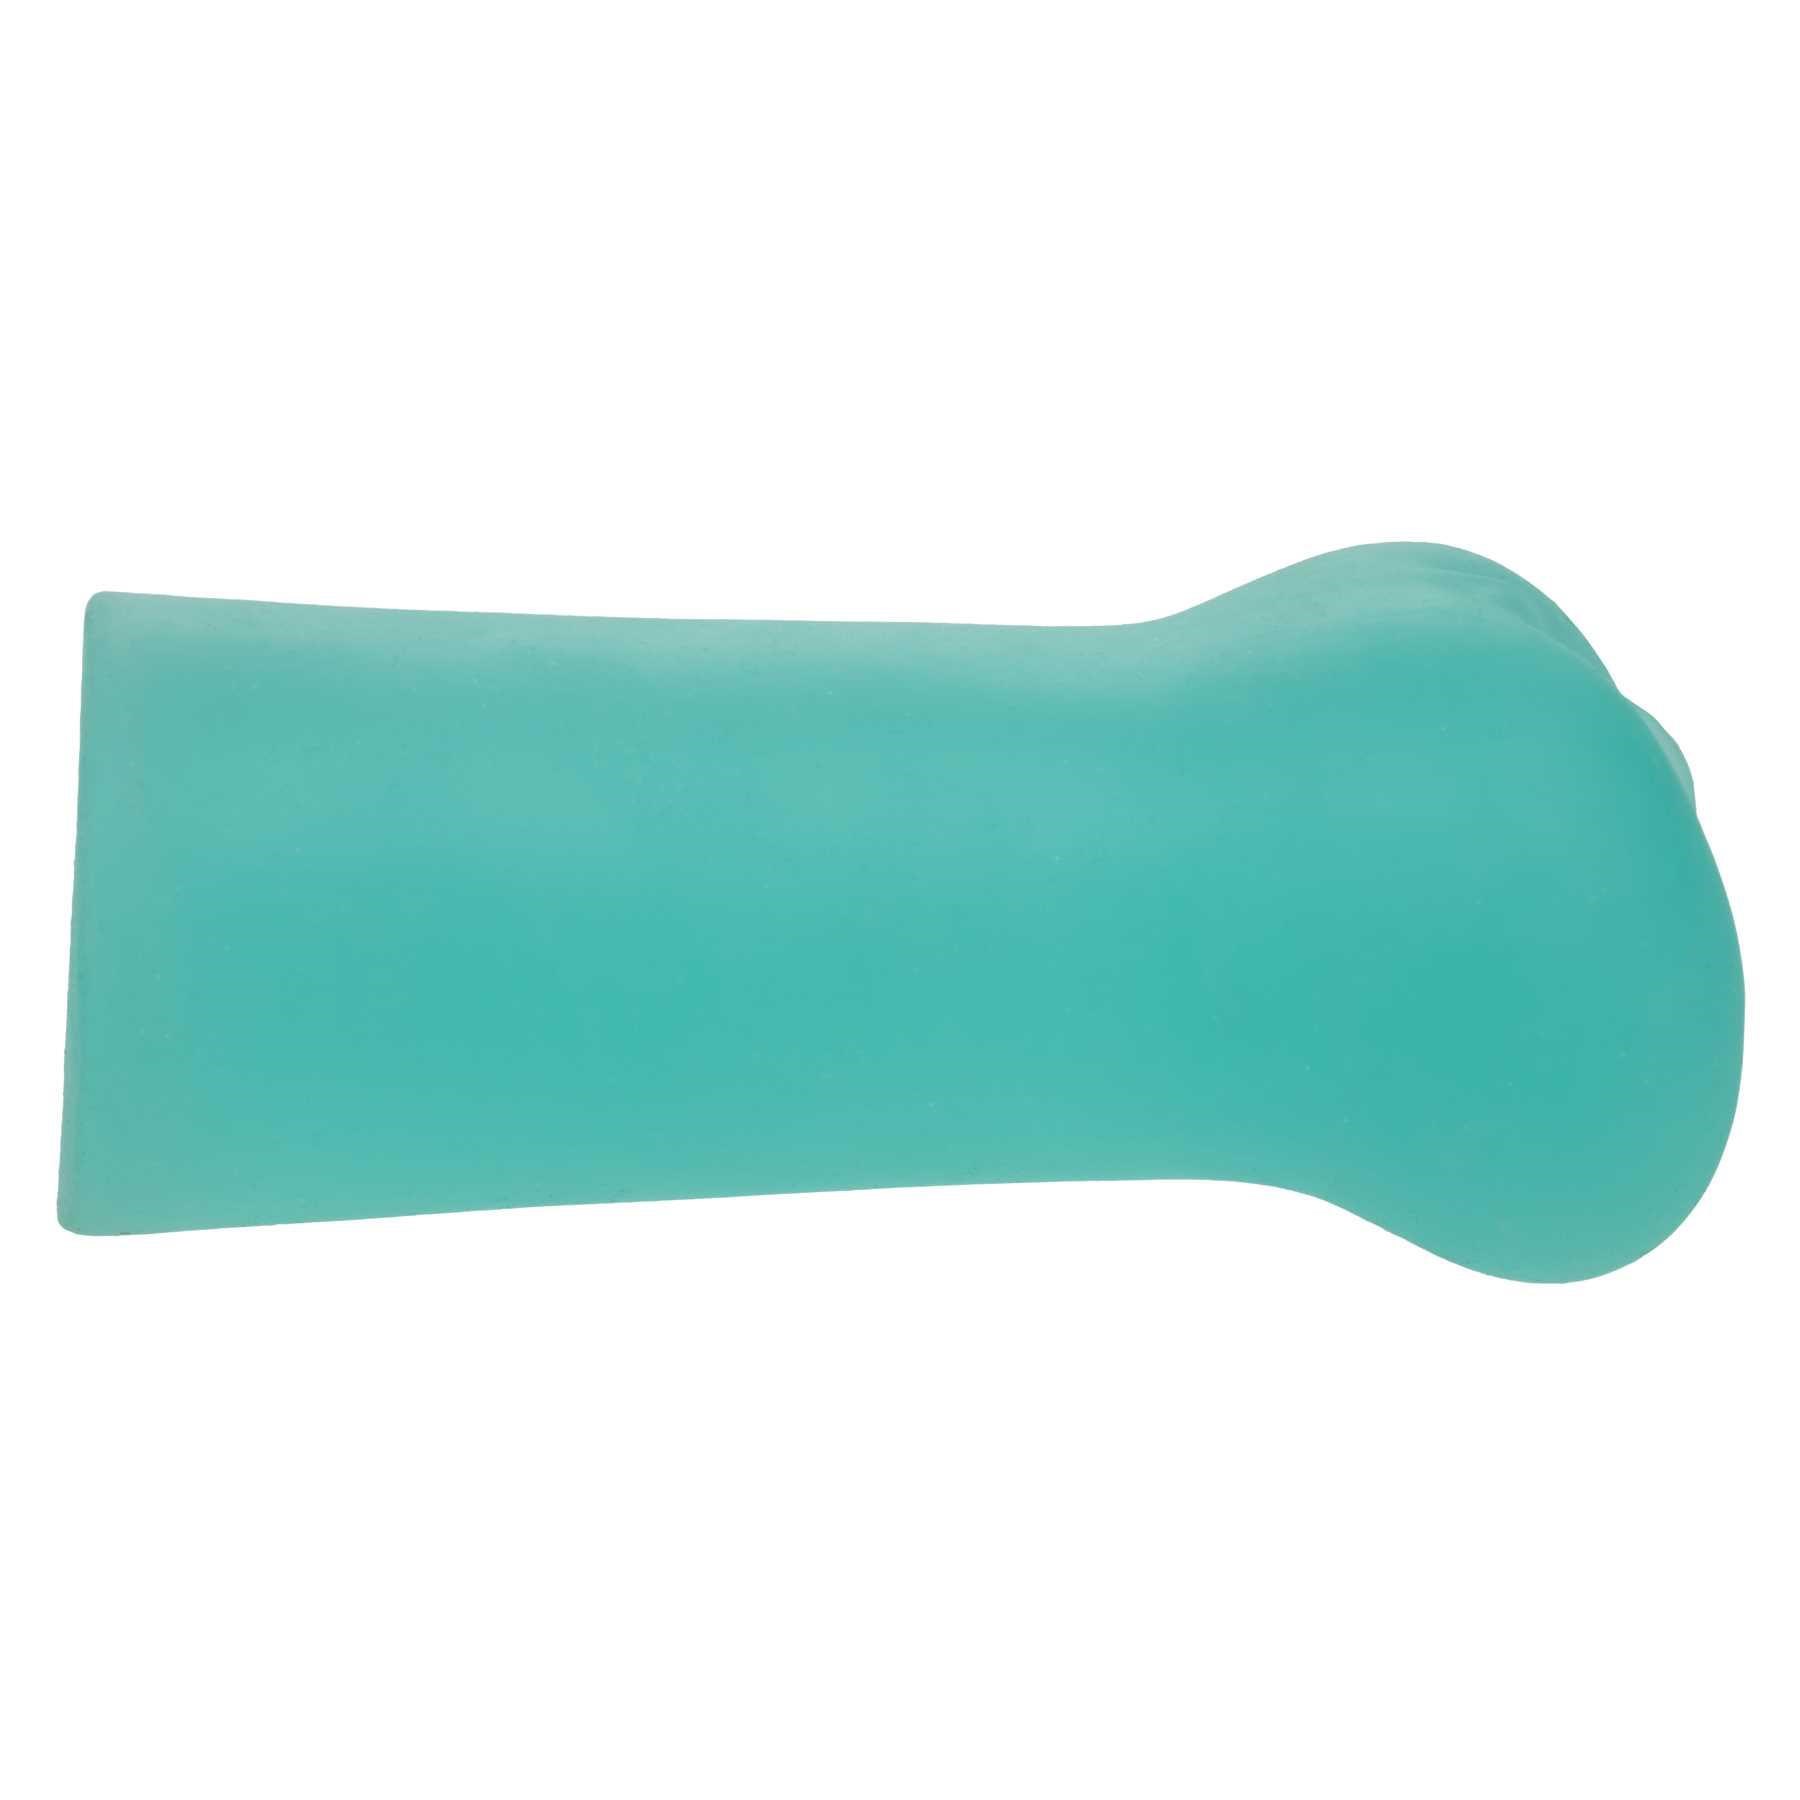 Cheap Thrills the Mermaid Stroker side view